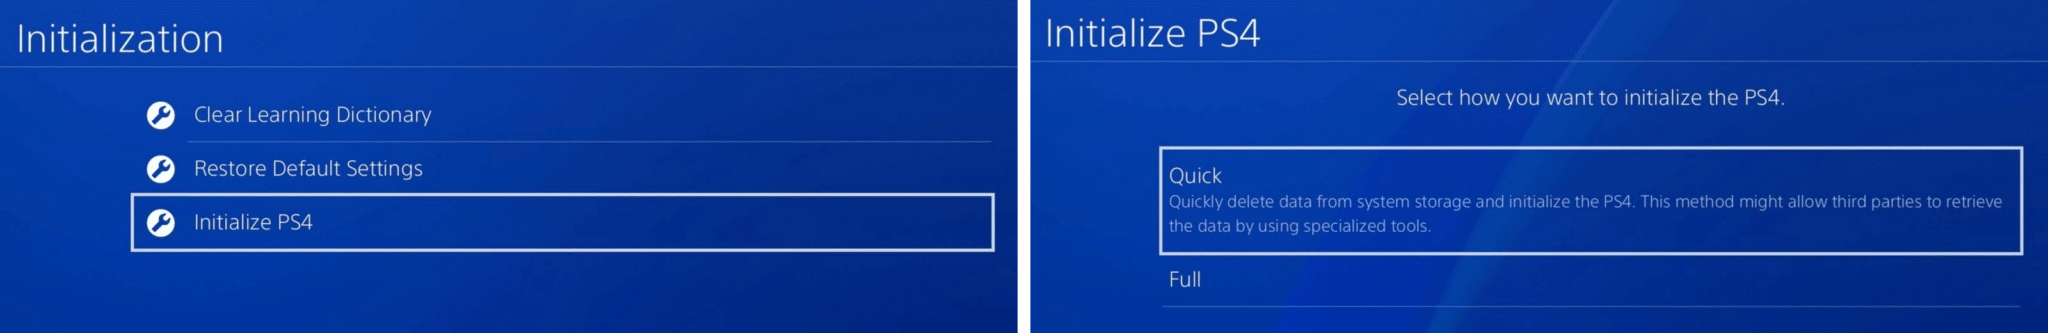 Factory reset PS4 settings to fix EA unable to connect